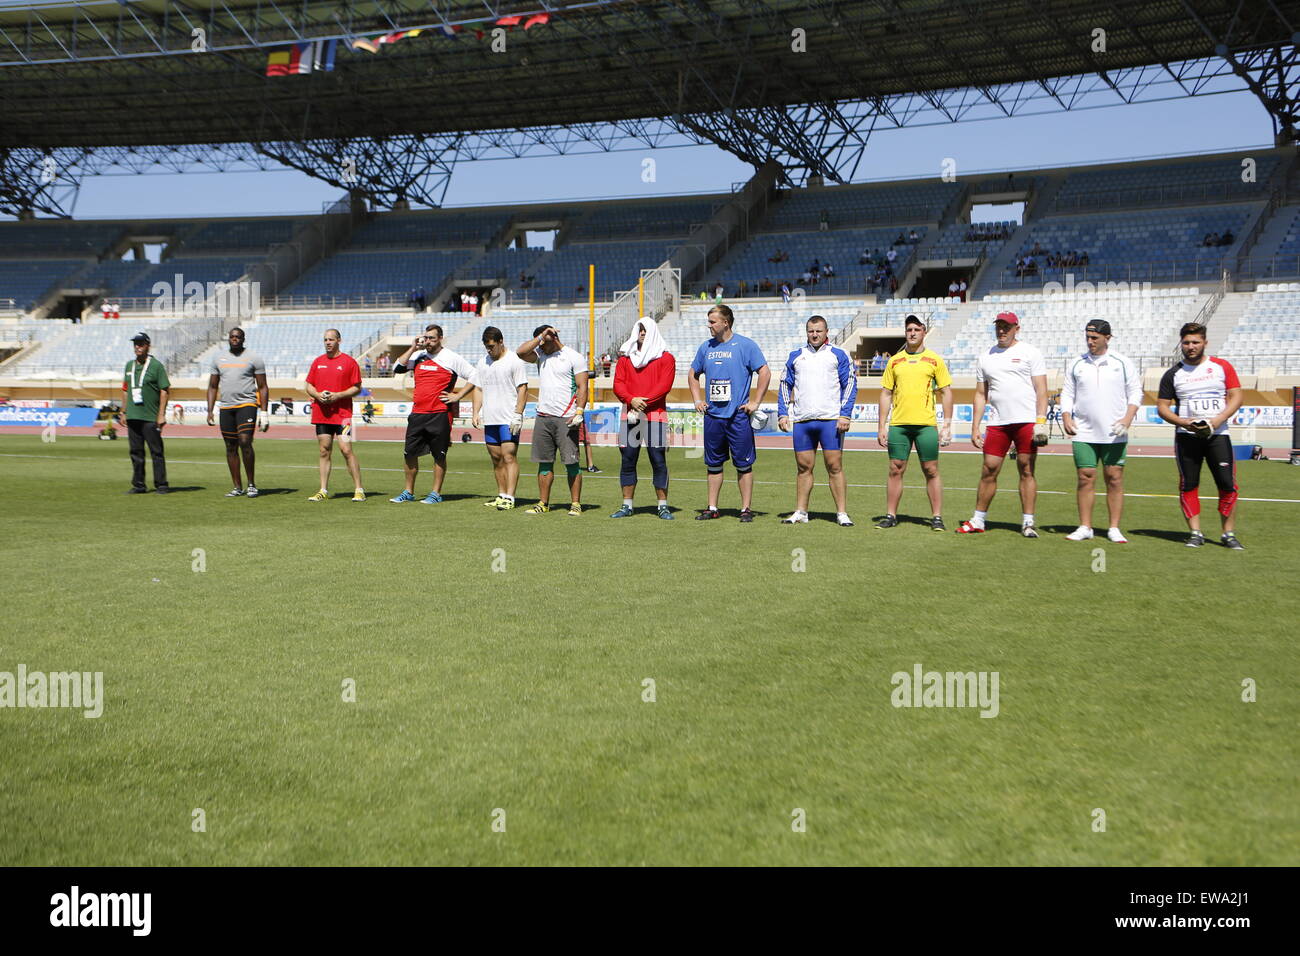 Heraklion, Greece. 20th June, 2015. The 12 hammer throwers are presented to the spectators. The first day of the 2015 European Athletics Team Championships First League saw 21 events with 1 athlete from each of the 12 participating countries taking place in the Pankrition Stadium in Heraklion on Crete. © Michael Debets/Pacific Press/Alamy Live News Stock Photo